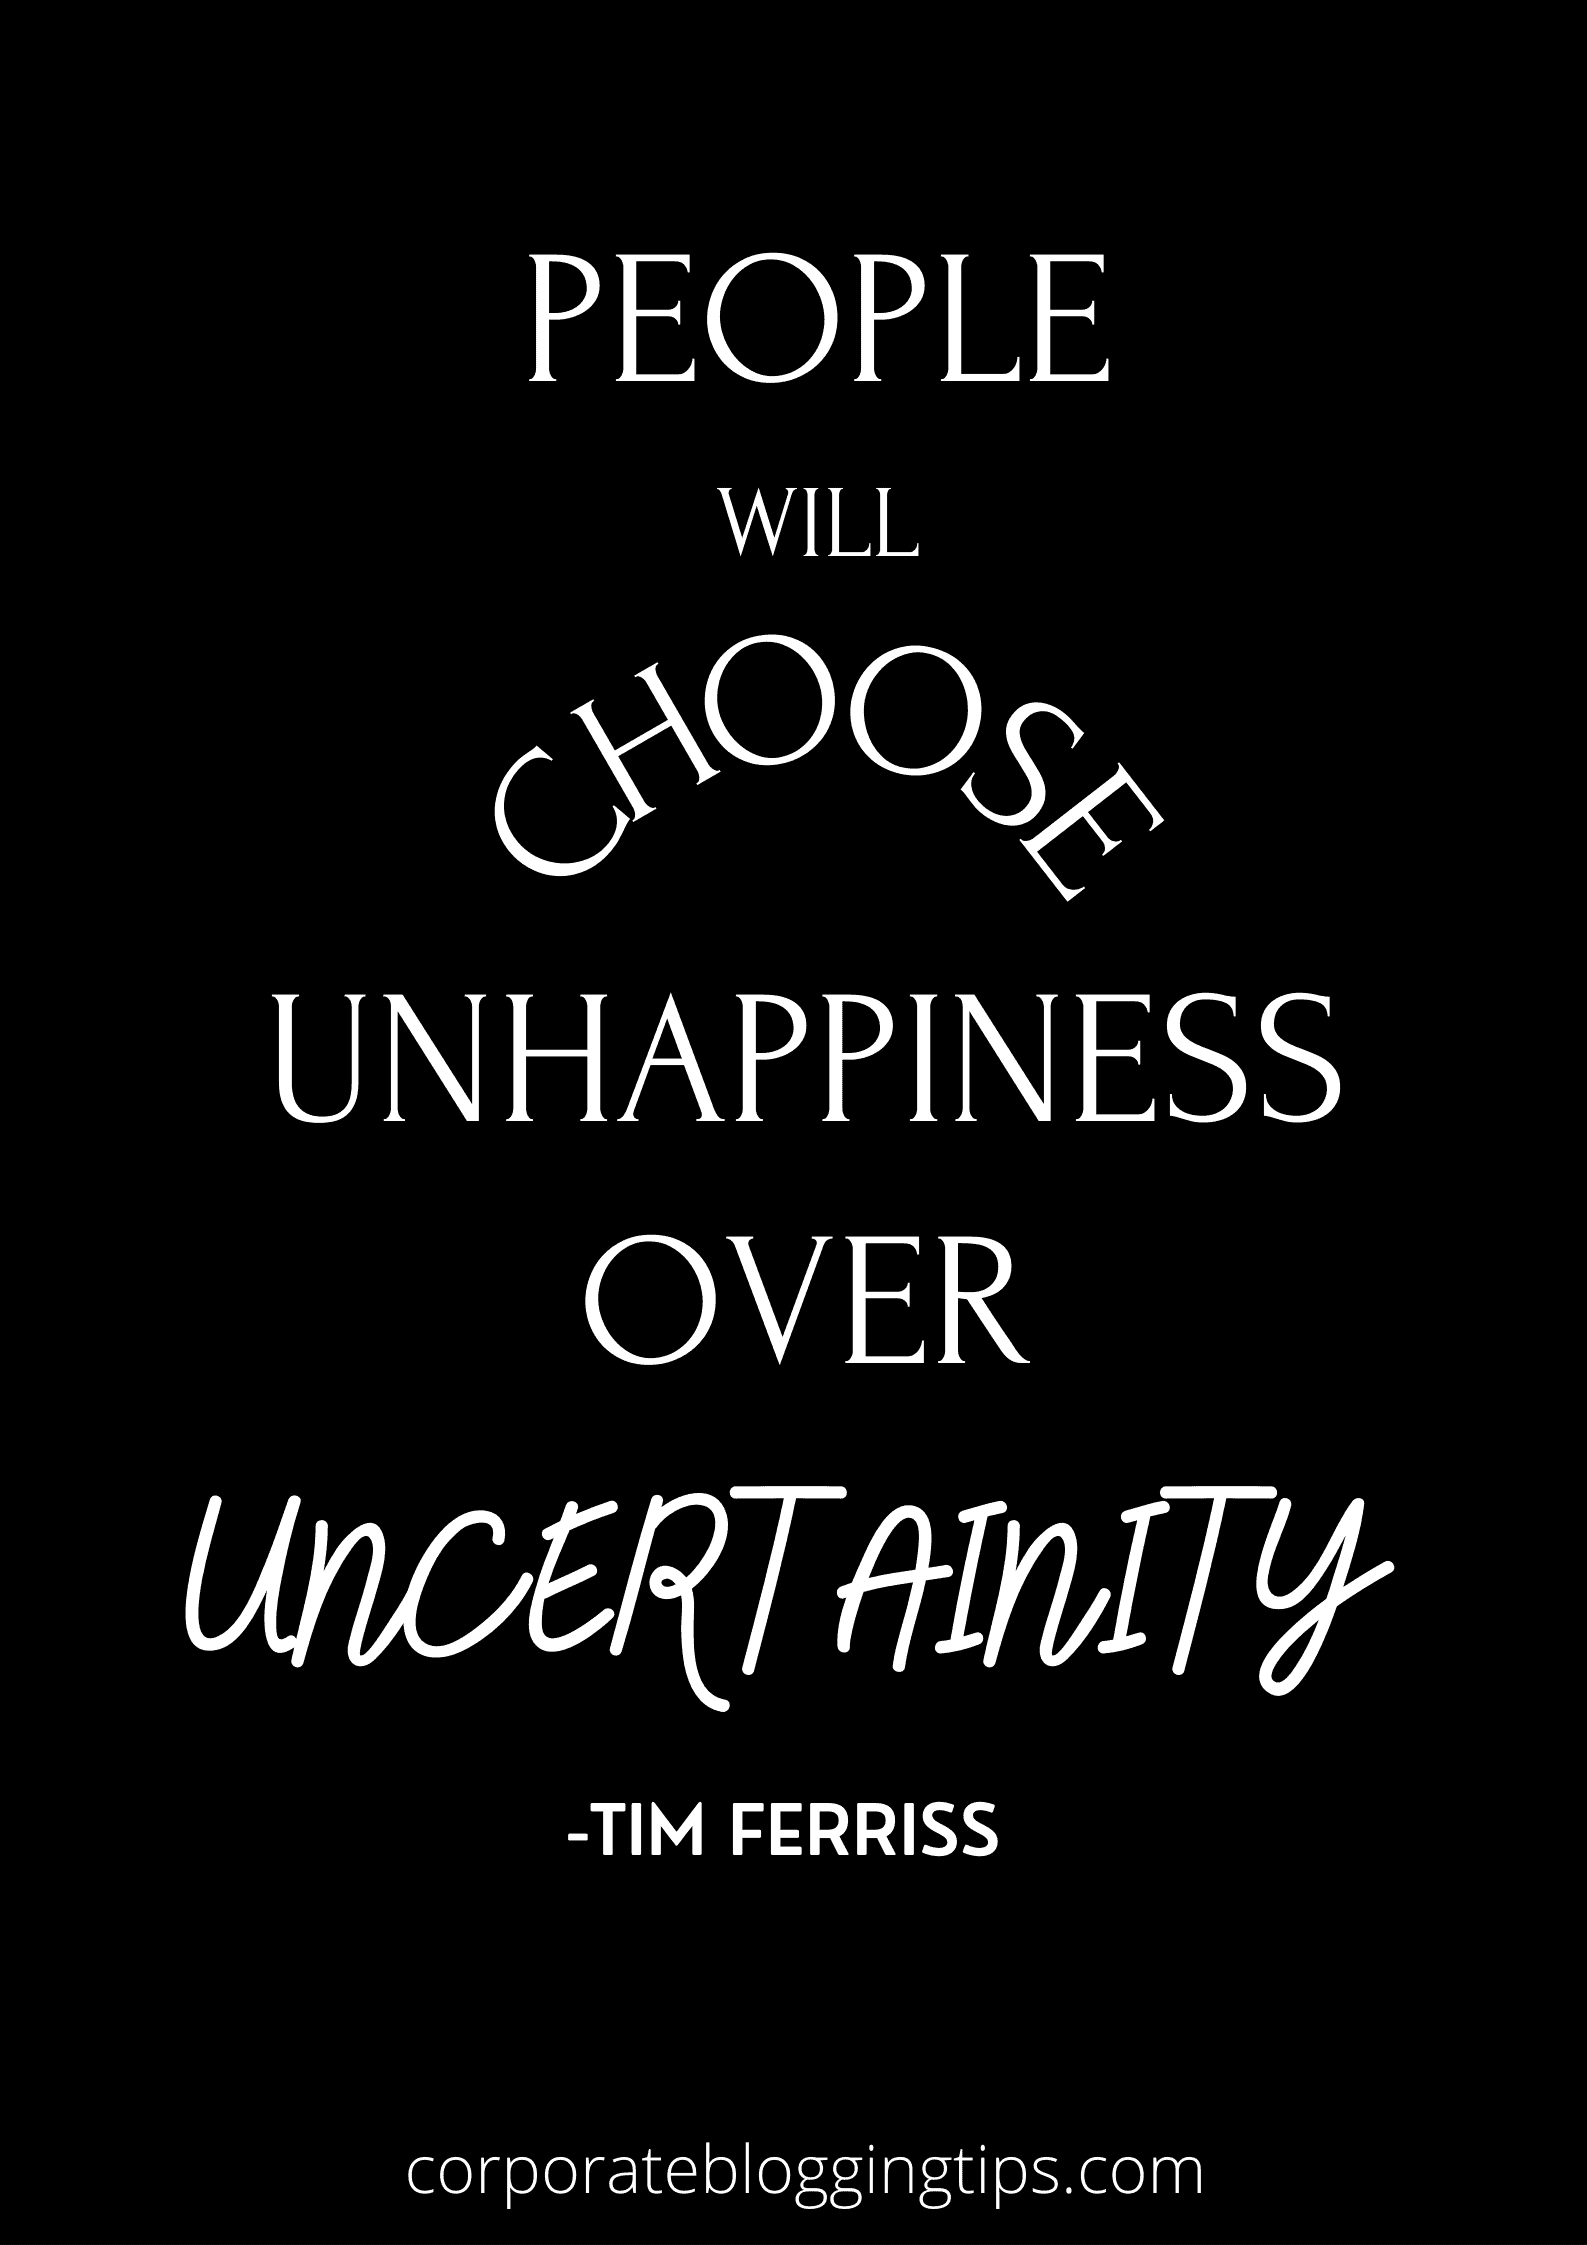 Quote by Tim Ferriss